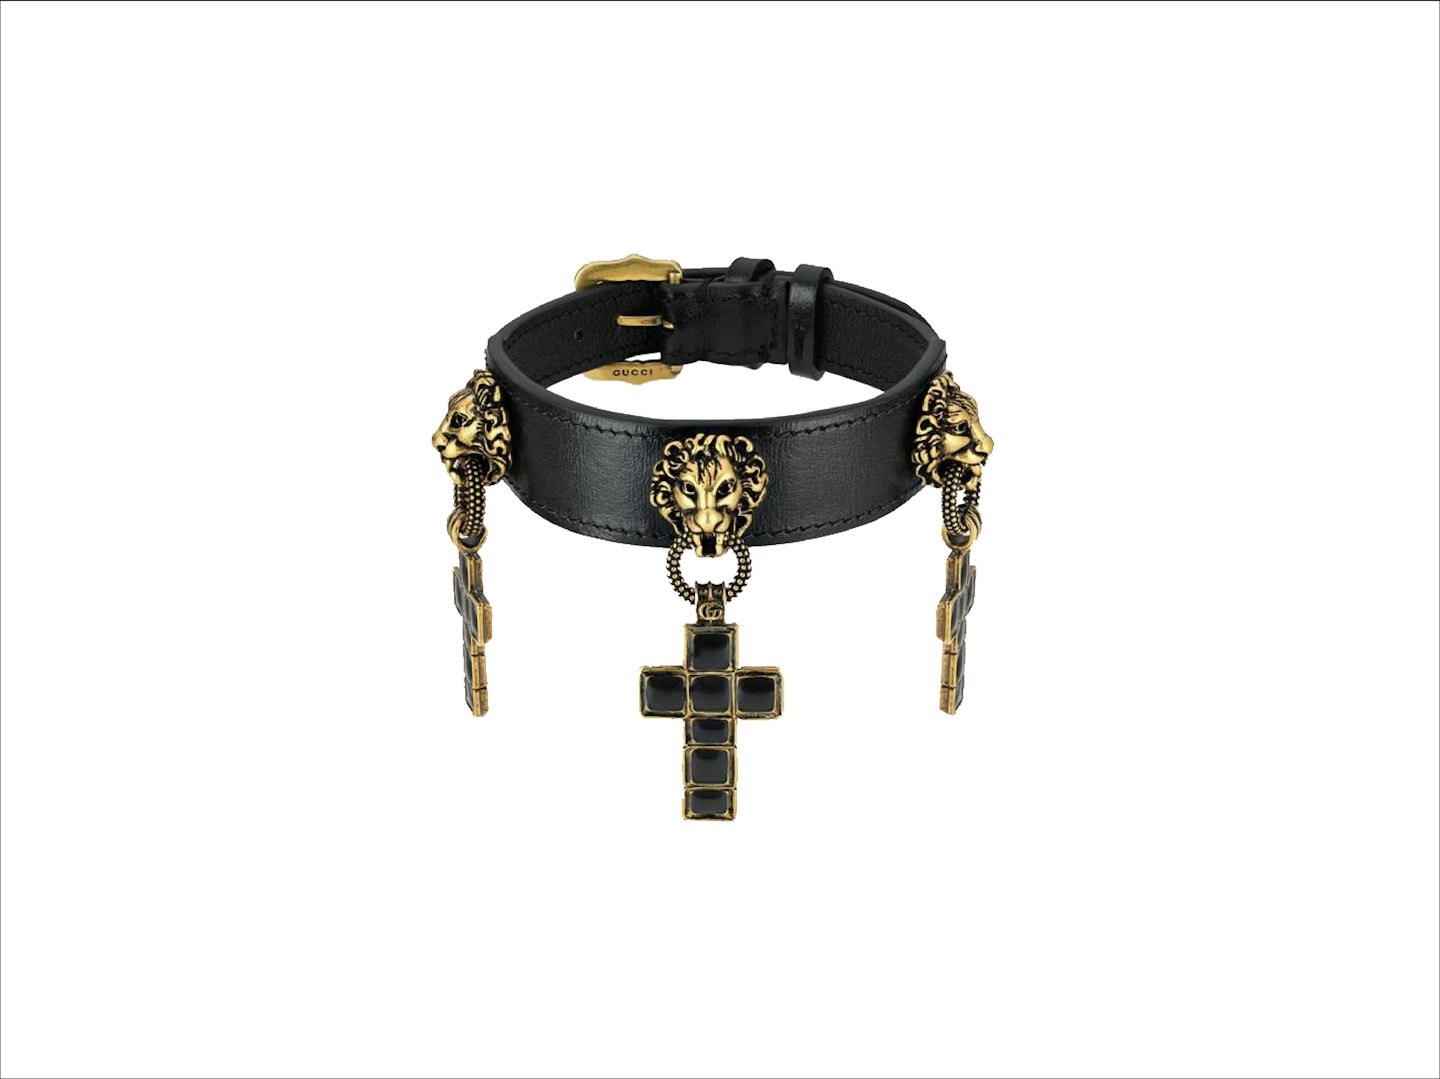 Leather Bracelet With Cross Pendants from Gucci